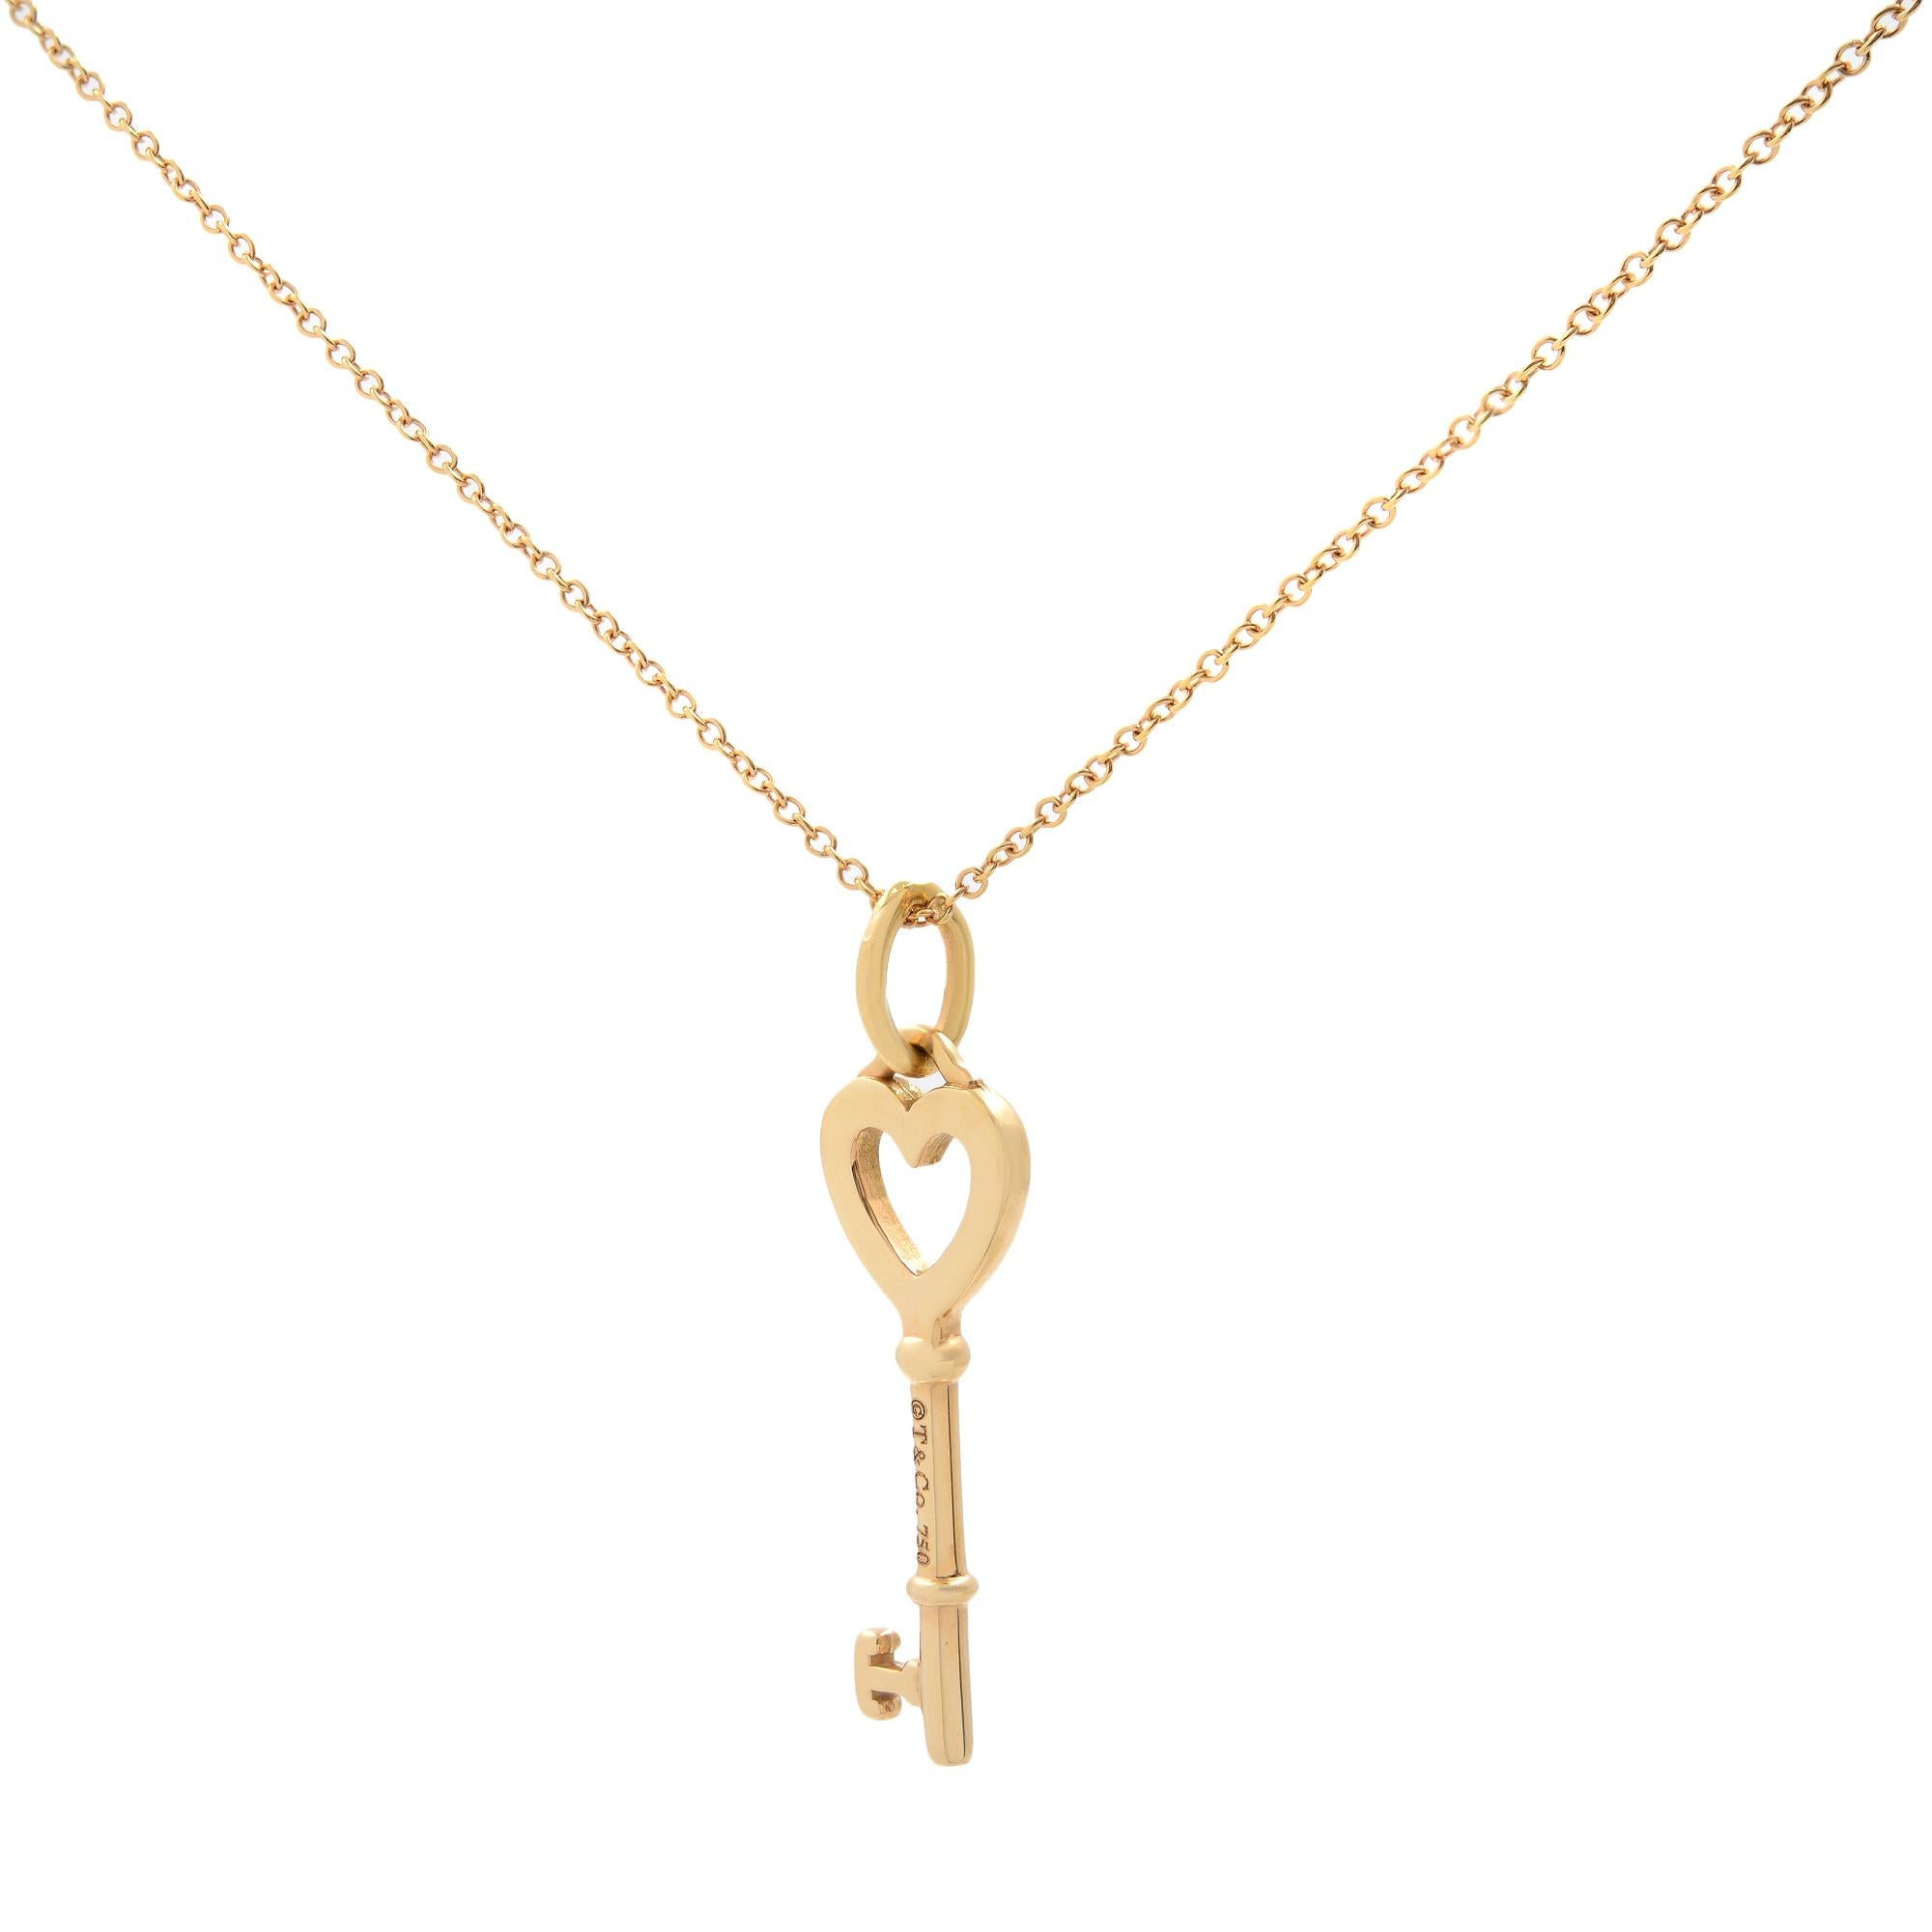 This exceptional Tiffany & Co. key heart pendant necklace comes in 18k rose gold with pendant size 32.00mm x 10.00mm and chain length 16 inches. The total weight of the item is 3.6 grams. Comes in excellent pre-owned condition. Original box and